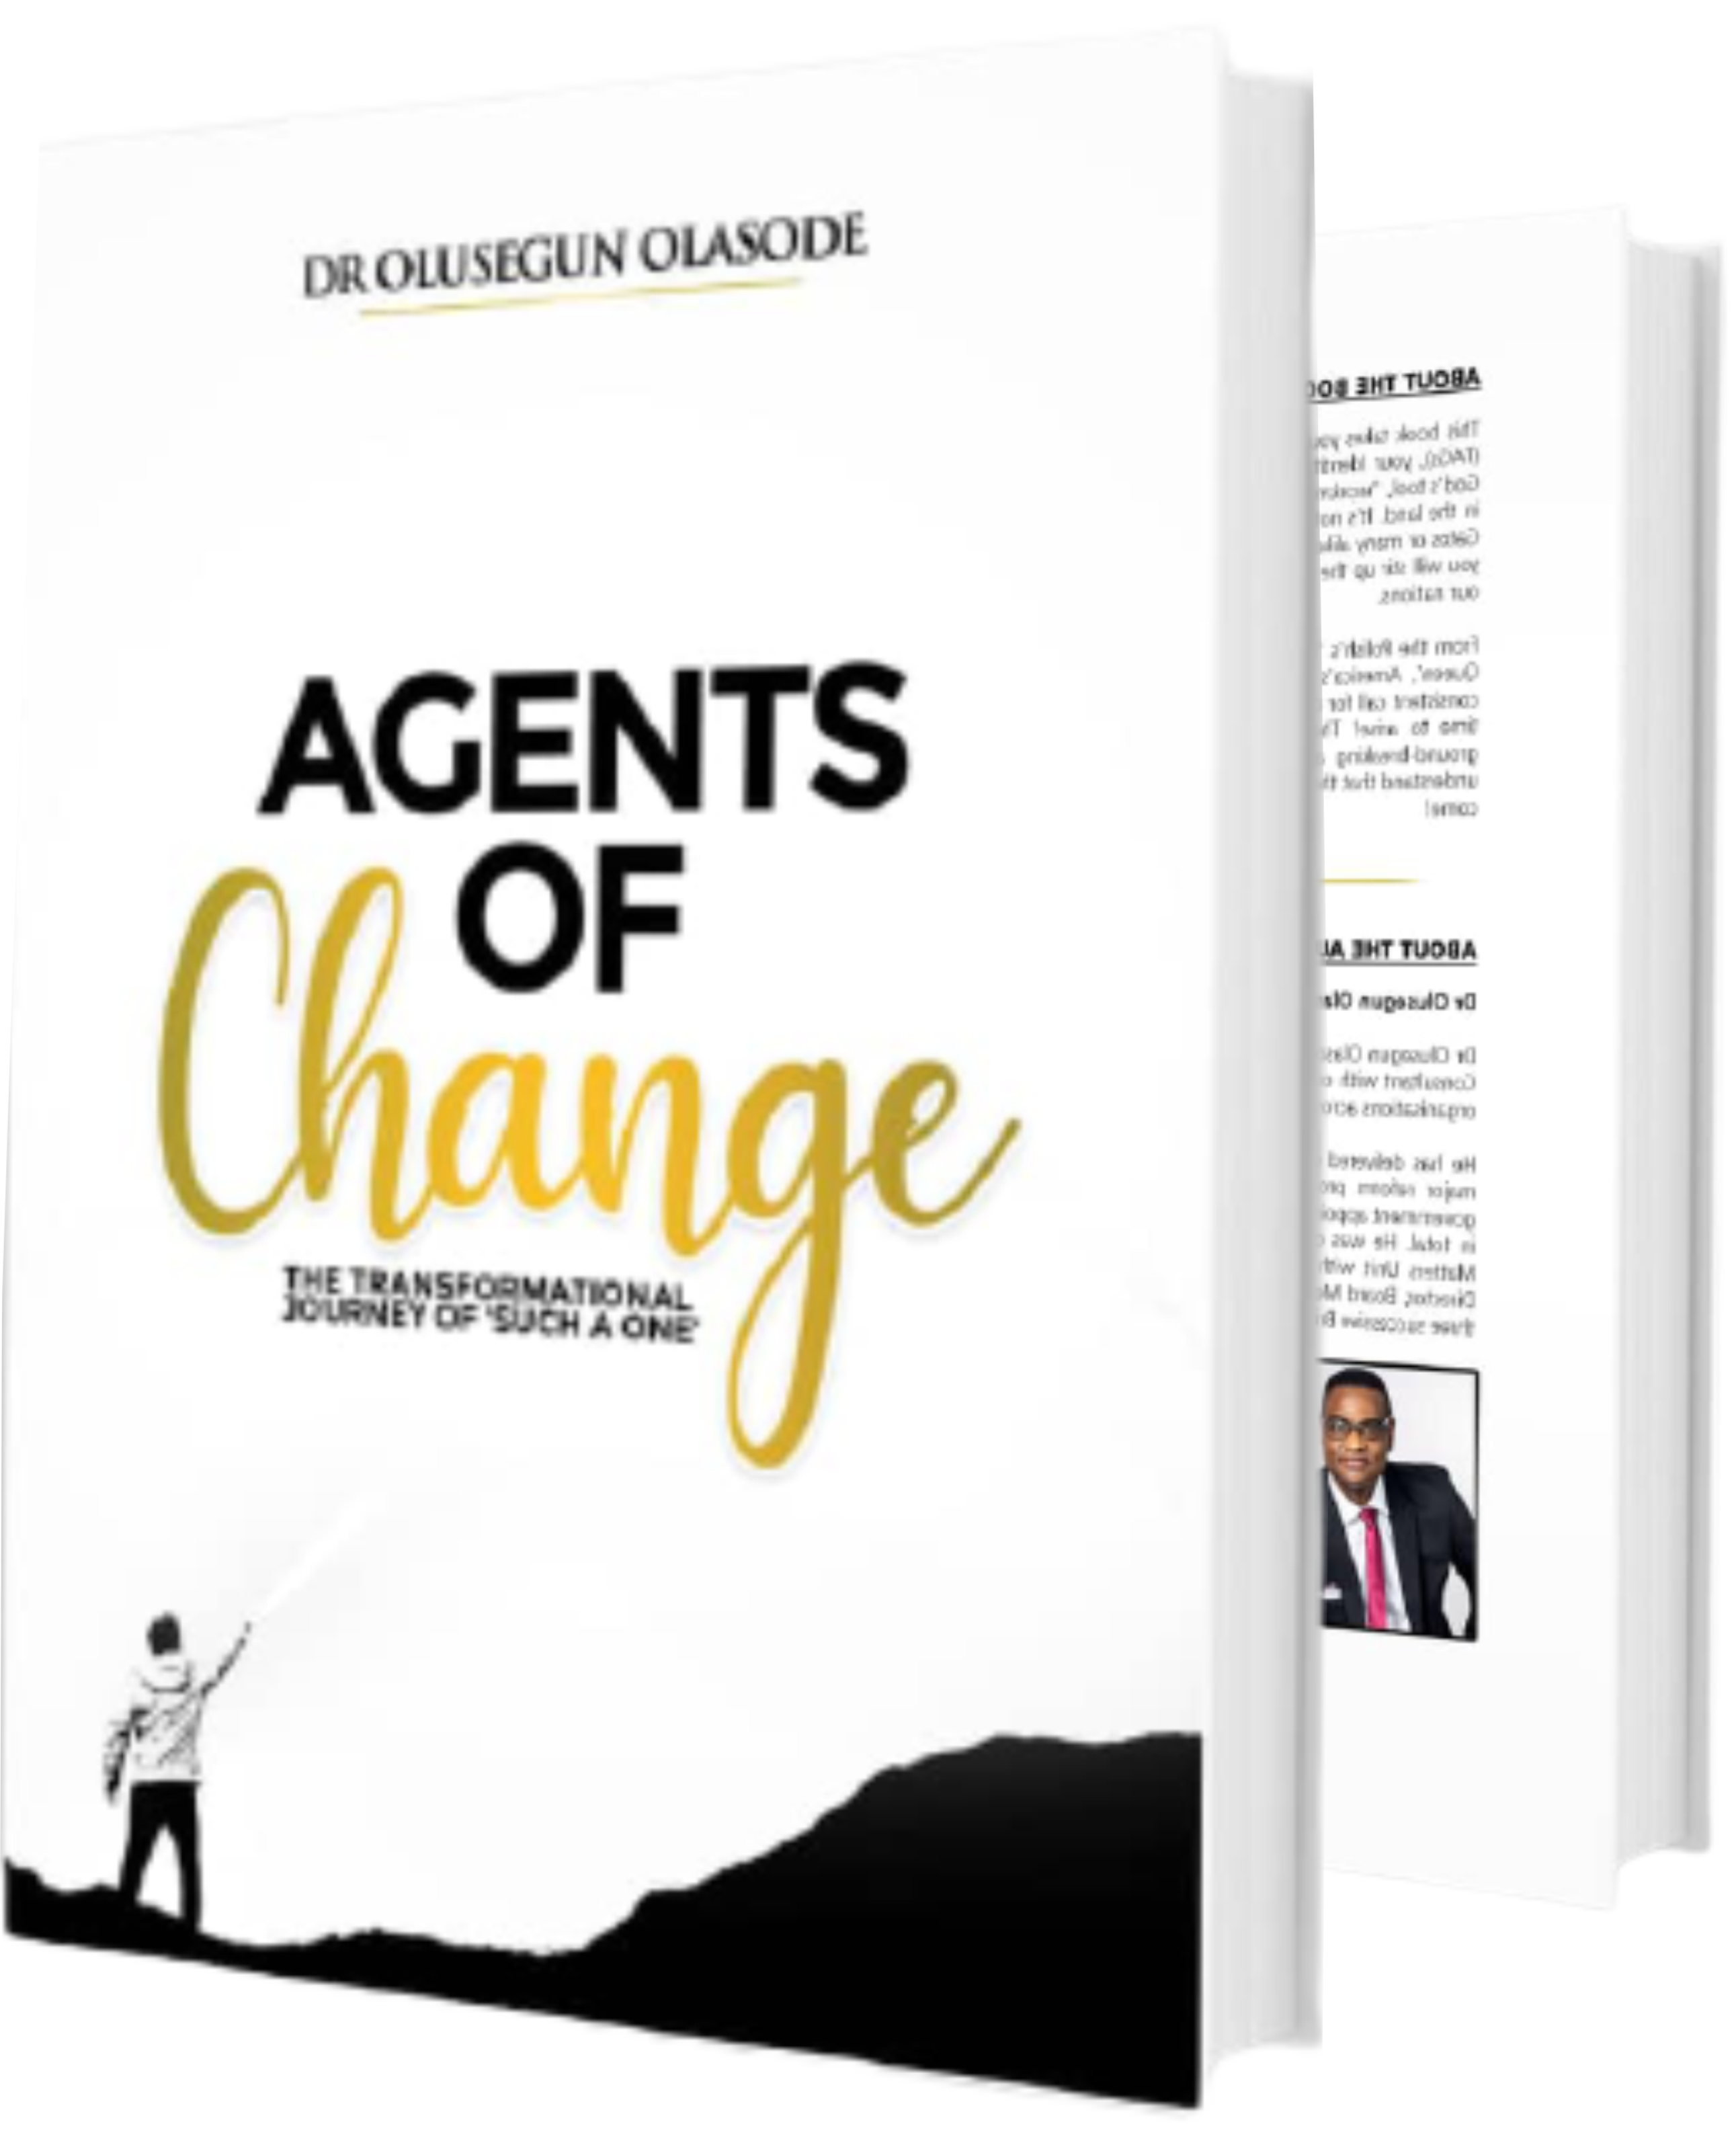 Dr. Olu Olasode - the author Change and Transformational Leadership